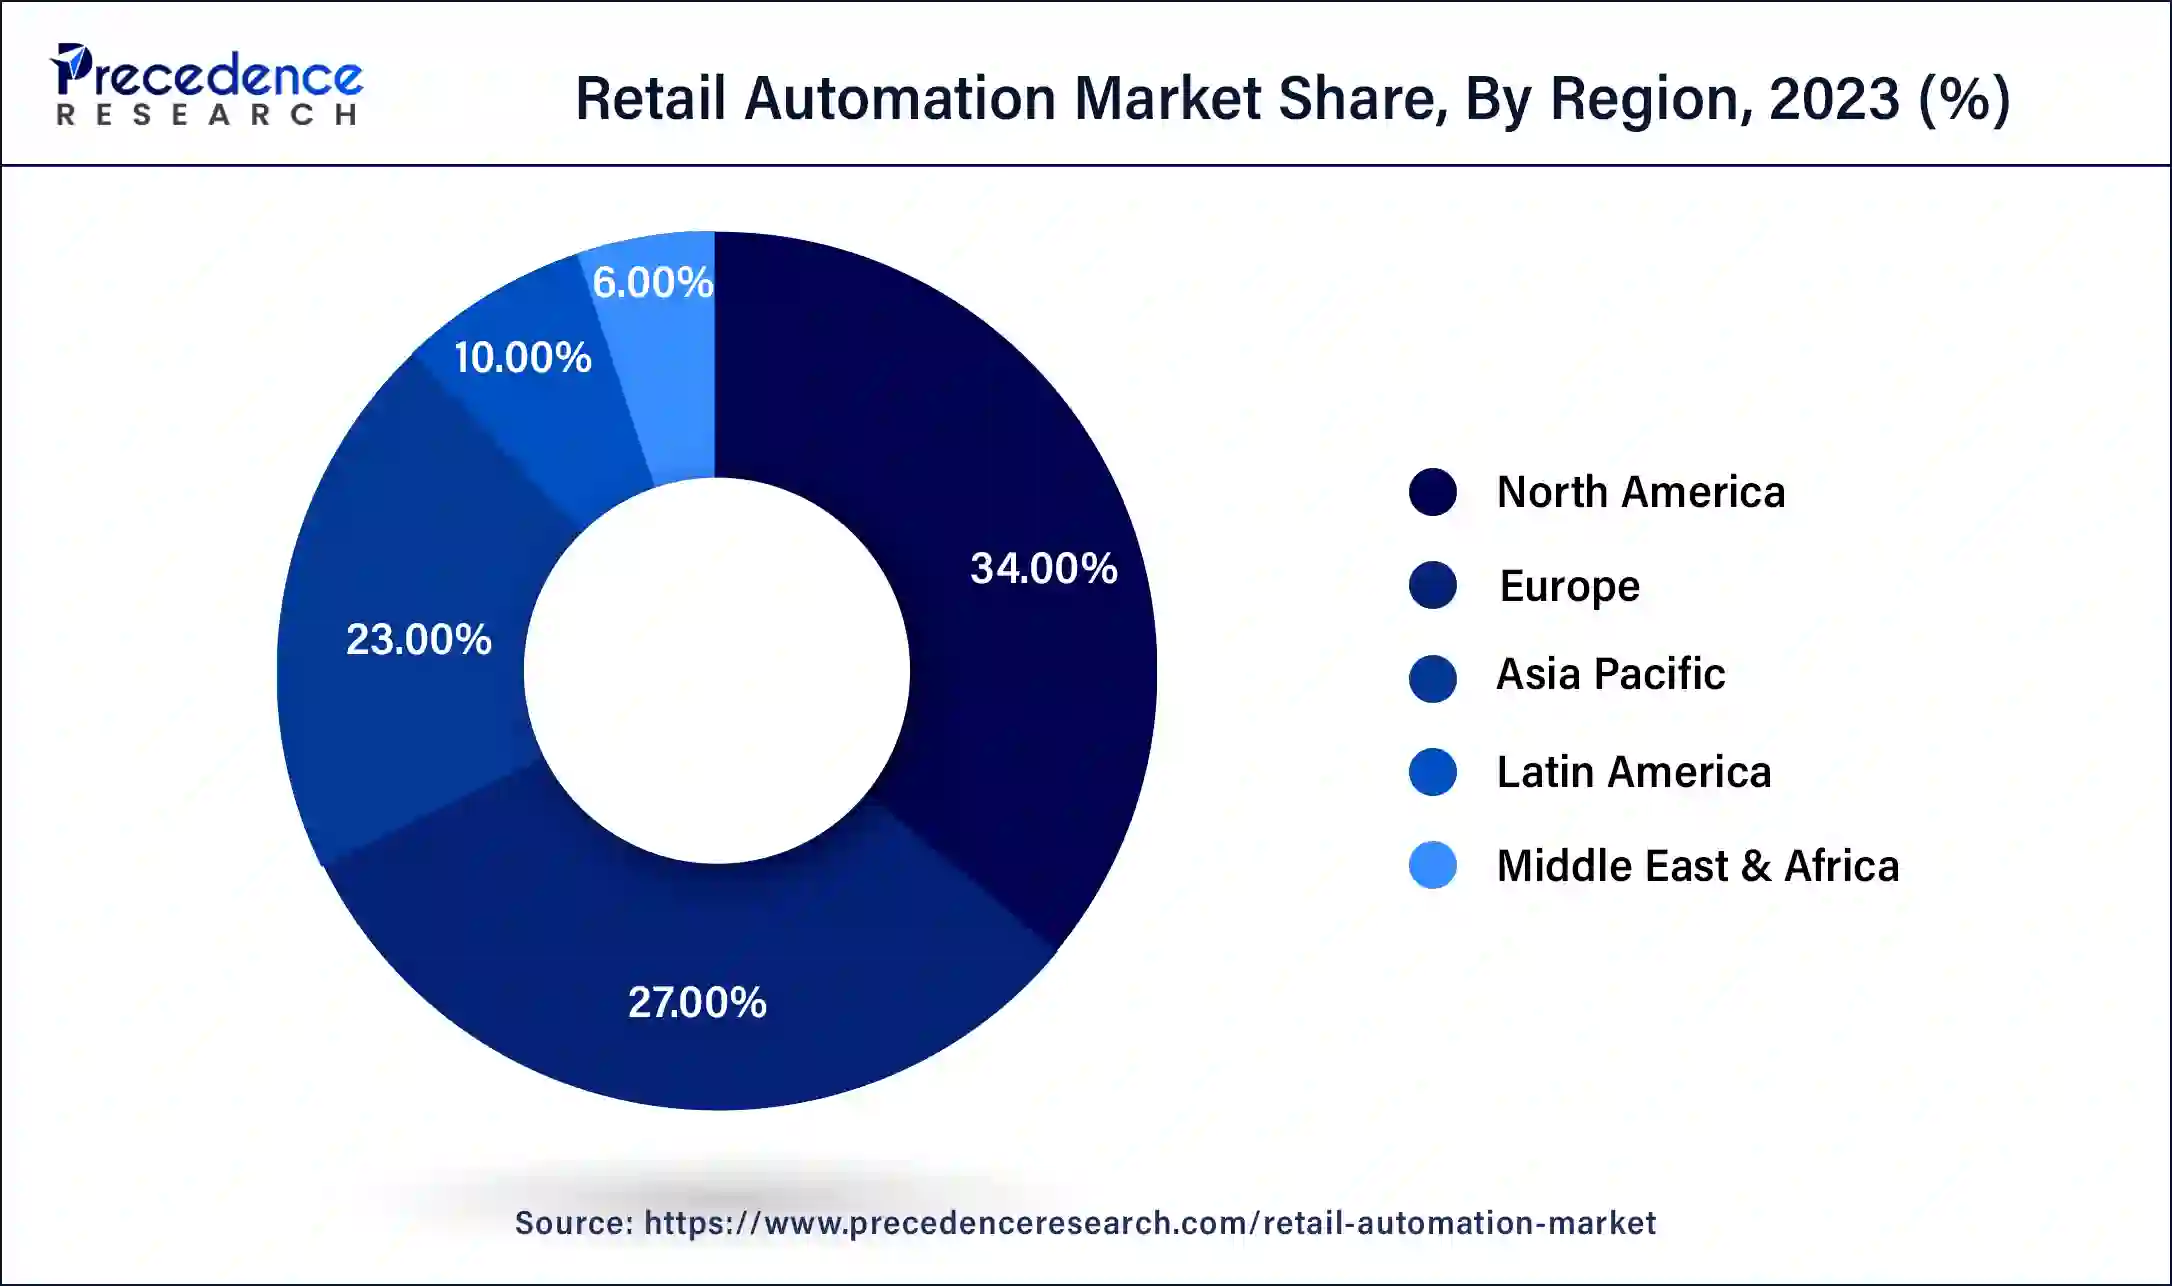 Retail Automation Market Share, By Region 2023 (%)